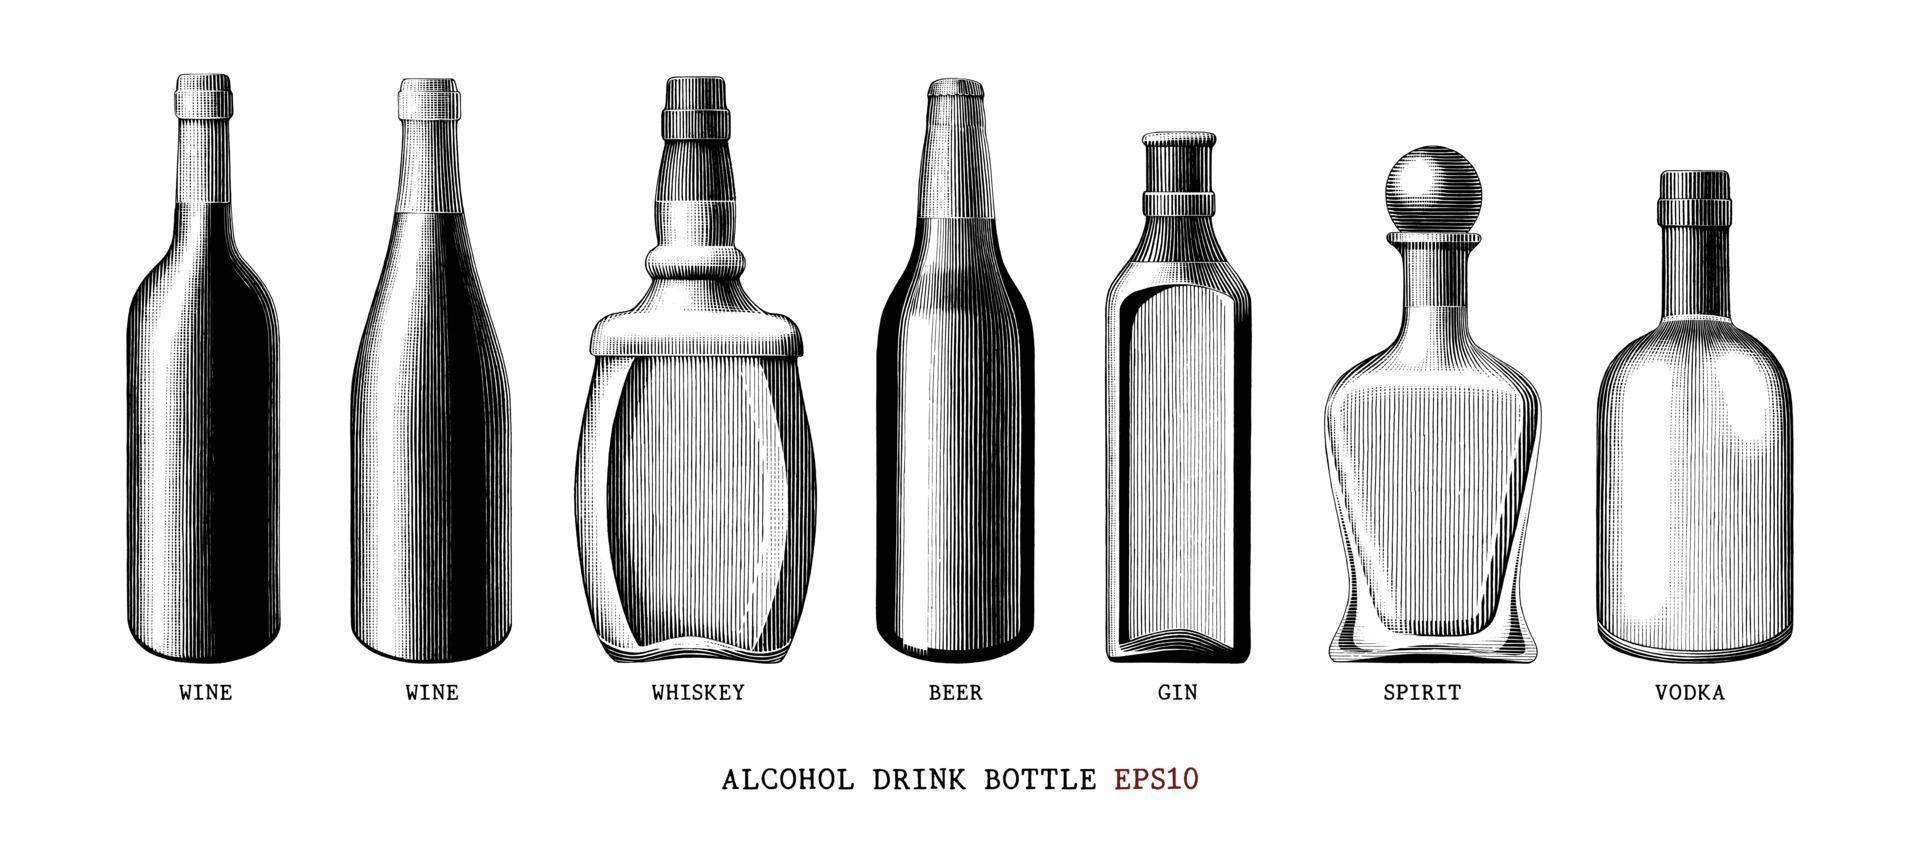 Alcohol drink bottle collection hand drawn vintage style black and white art isolated on white background vector